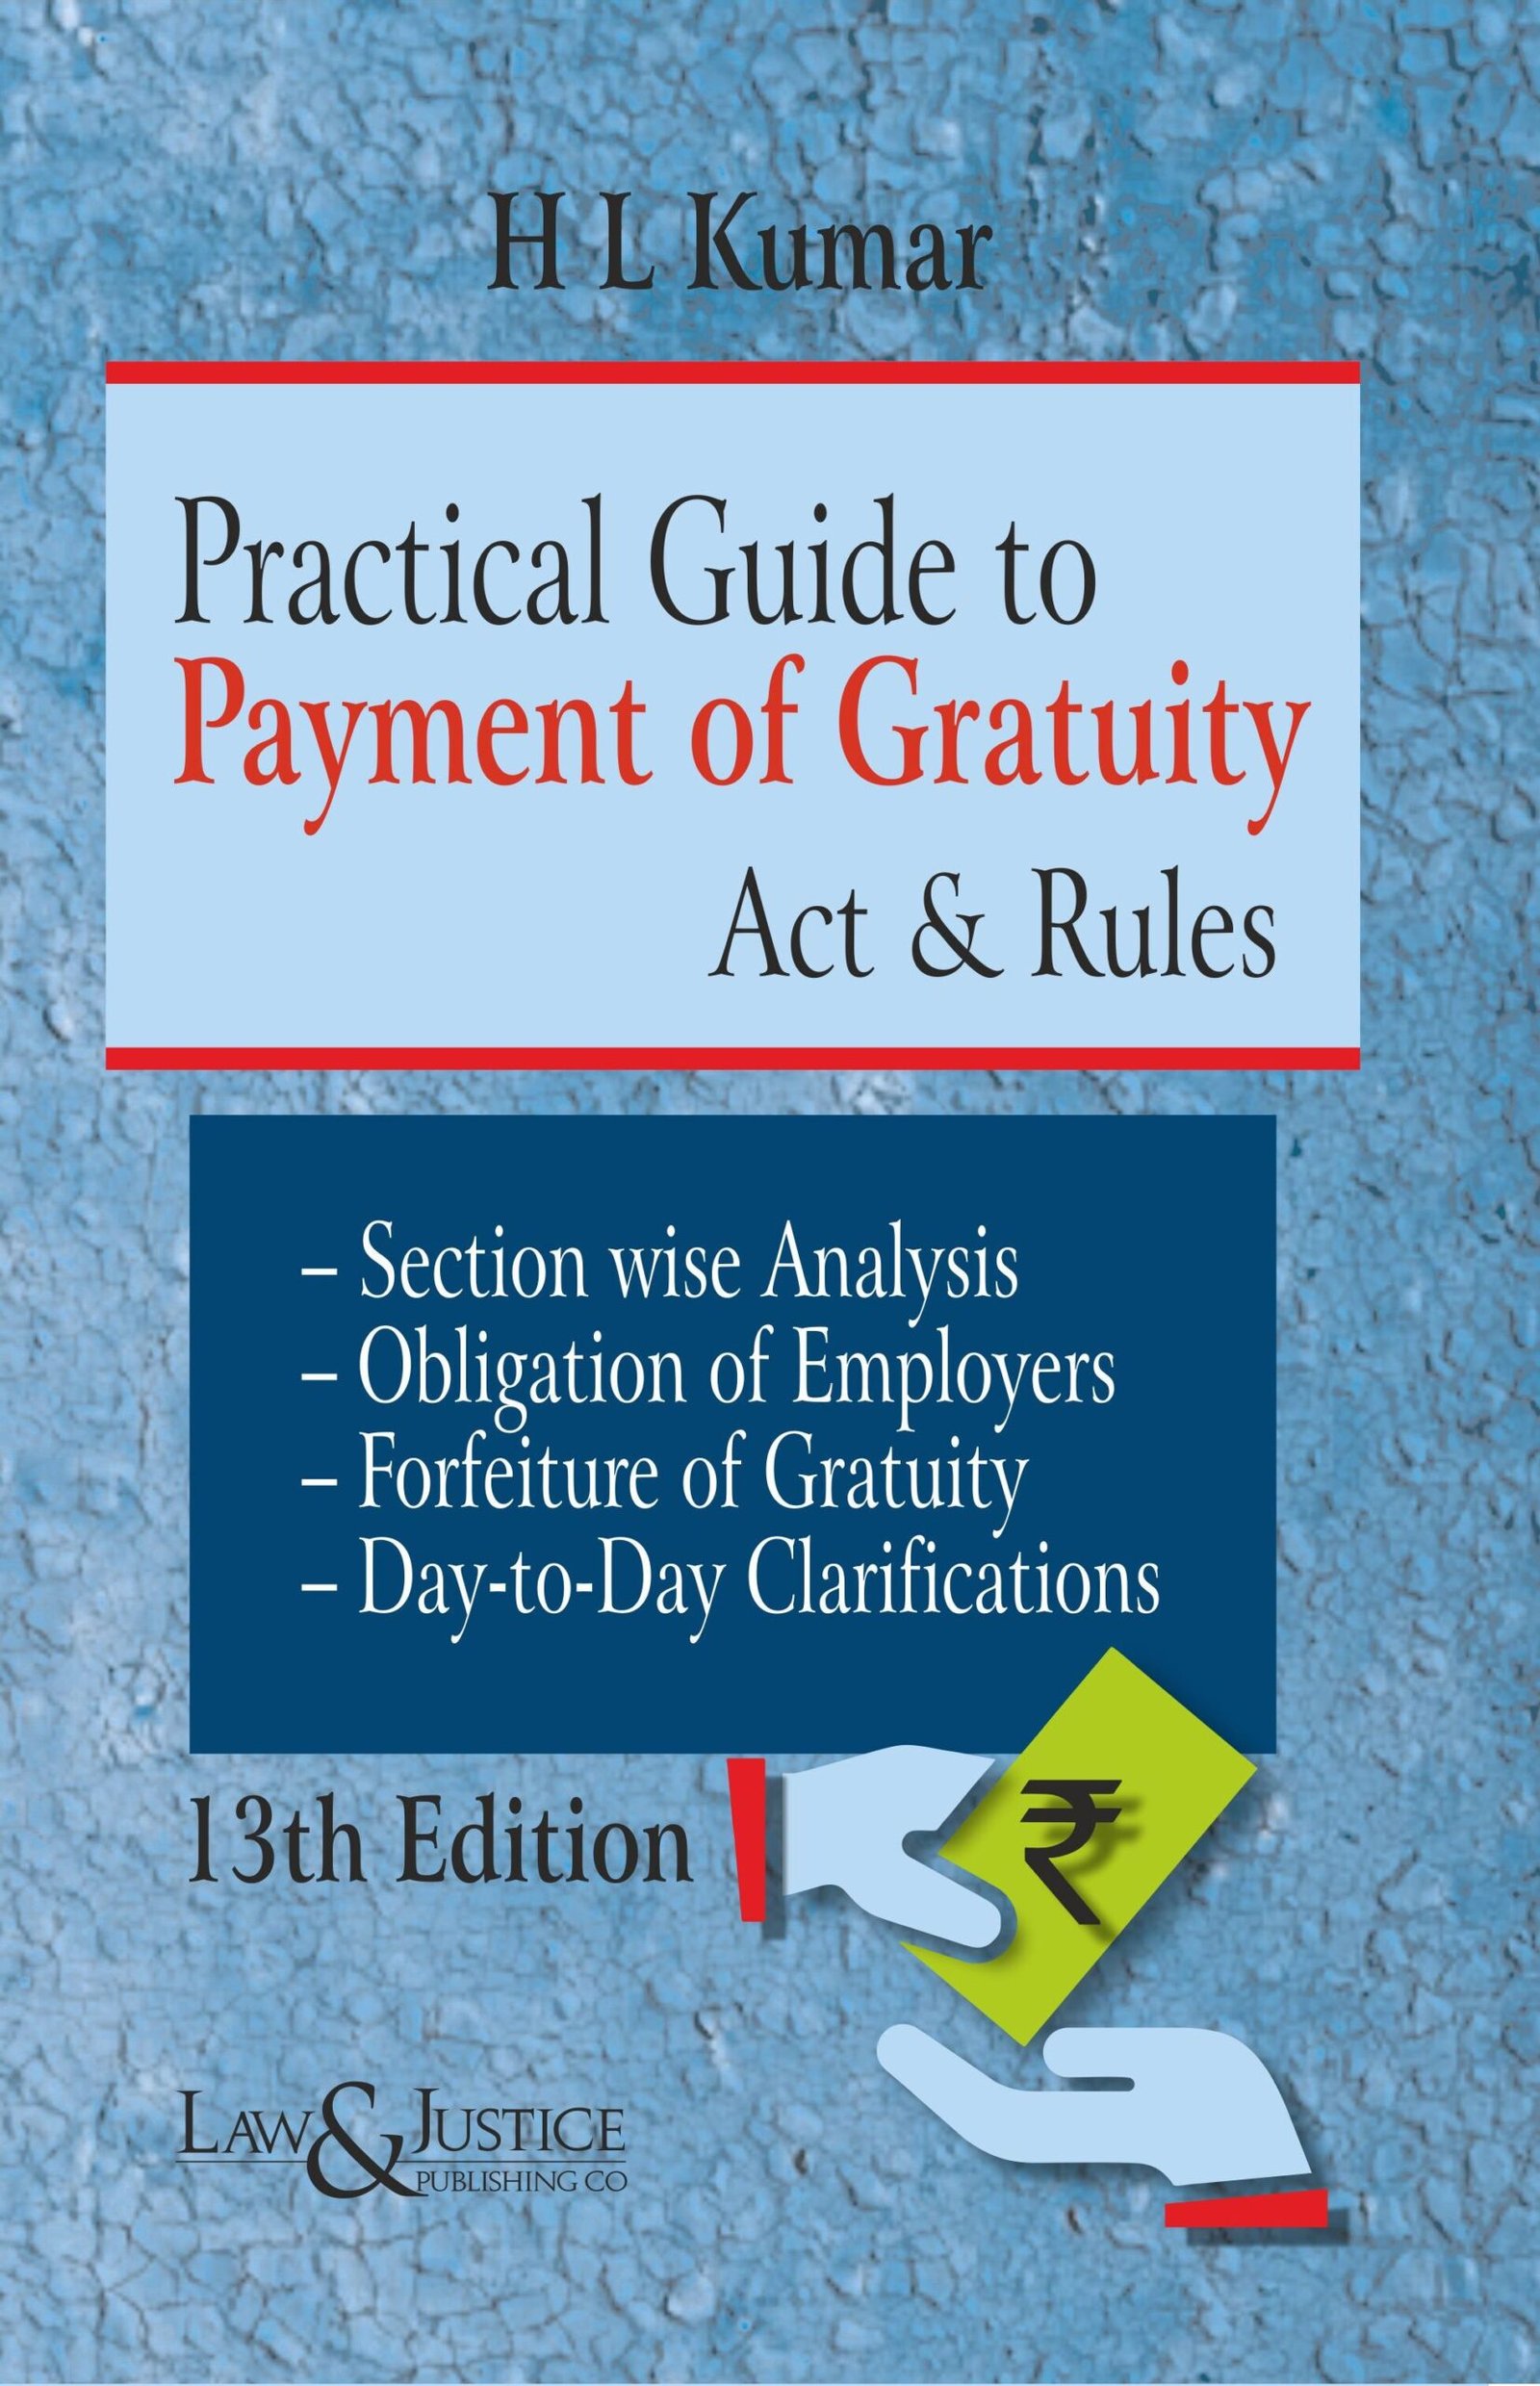 Practical Guide to Payment of Gratuity Act & Rules by H.L Kumar 13th